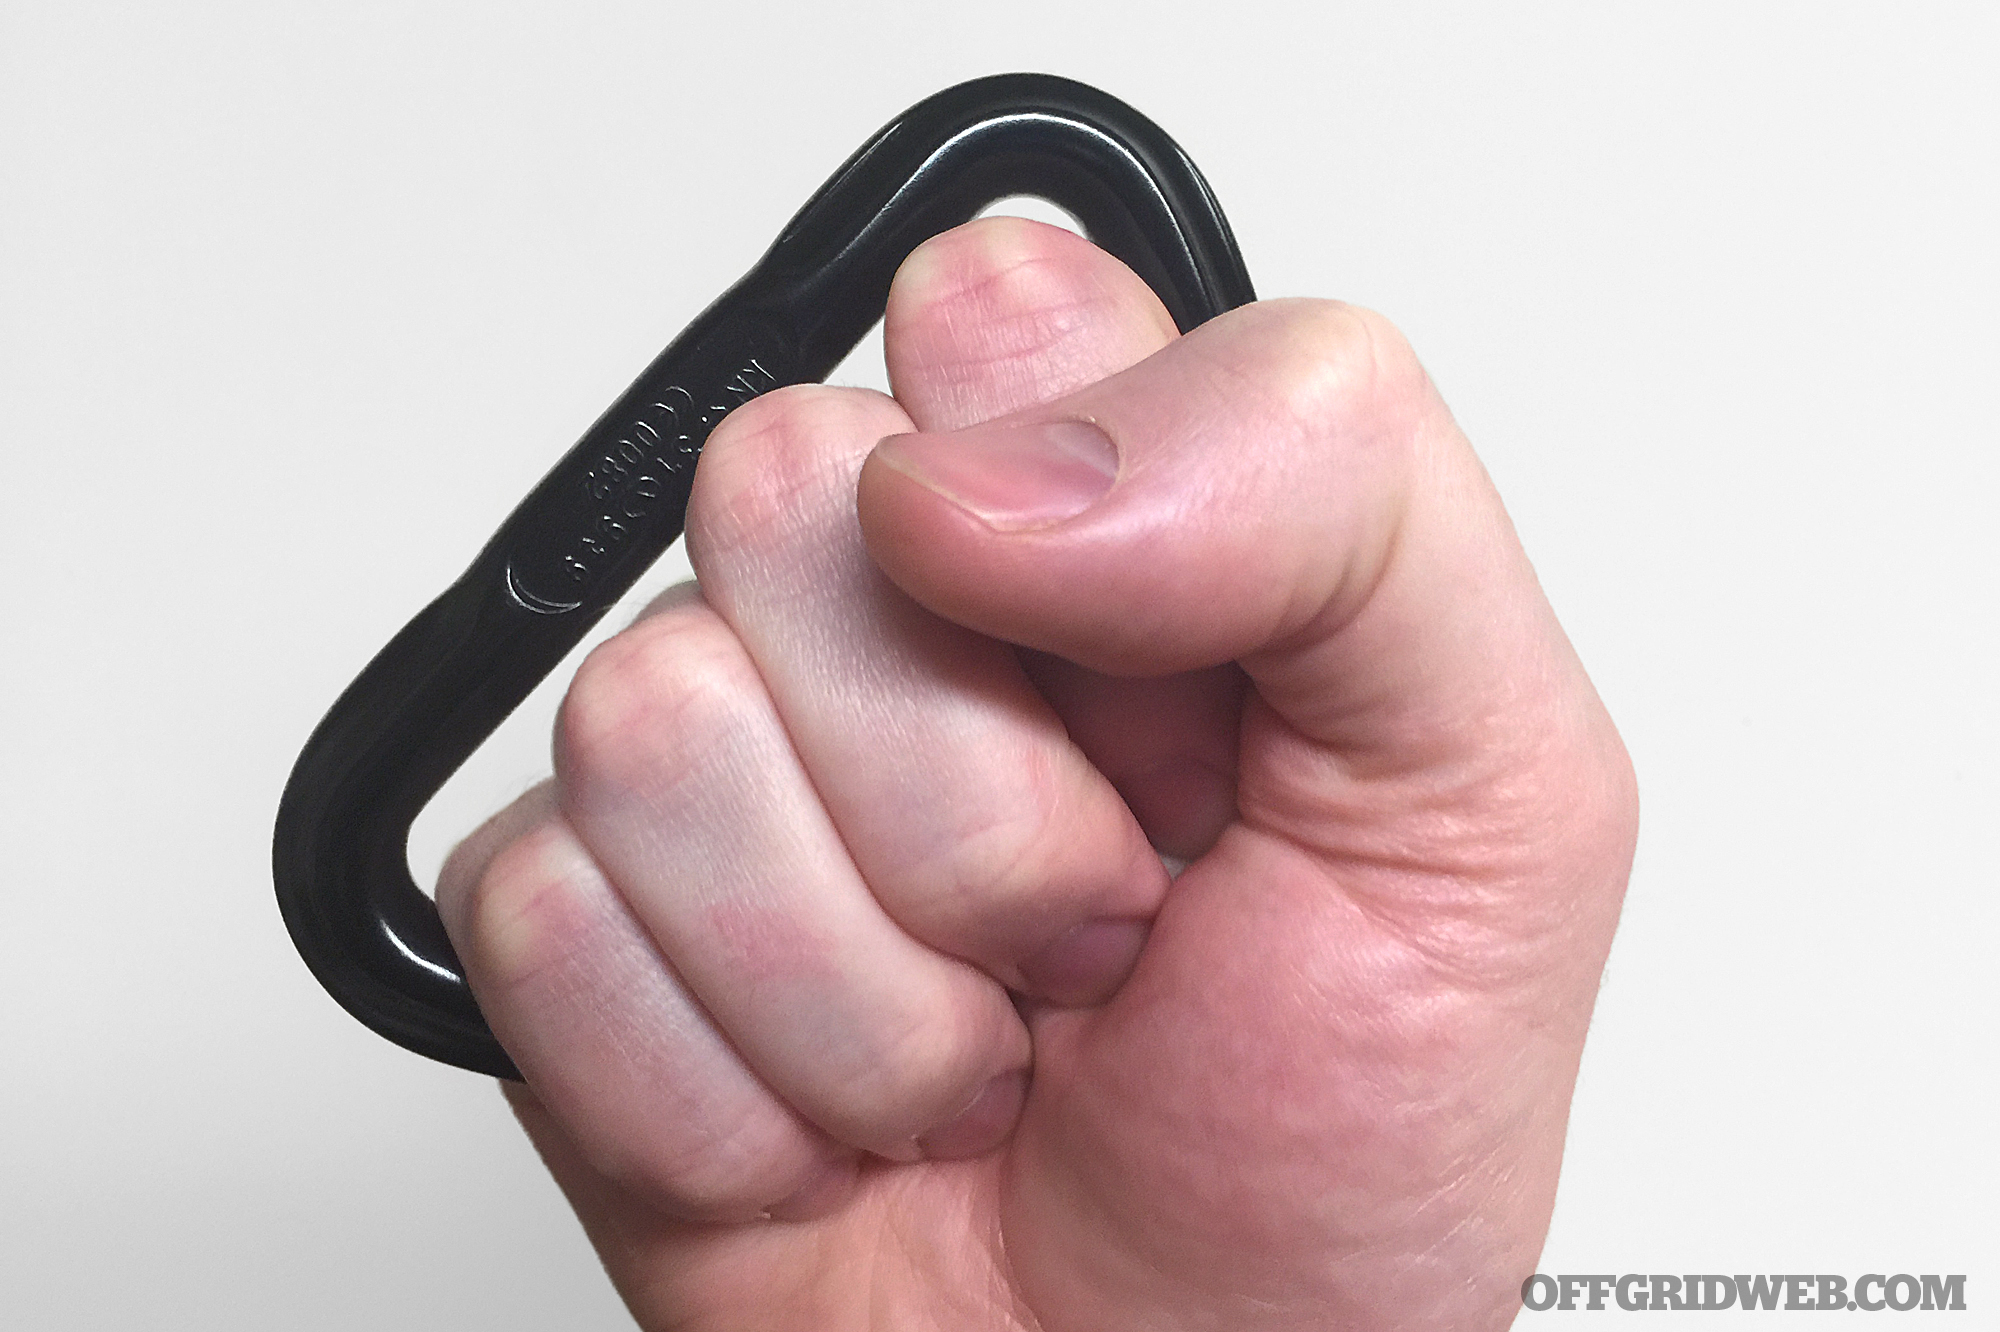 self defense - Is it effective to use a carabiner as tool in real